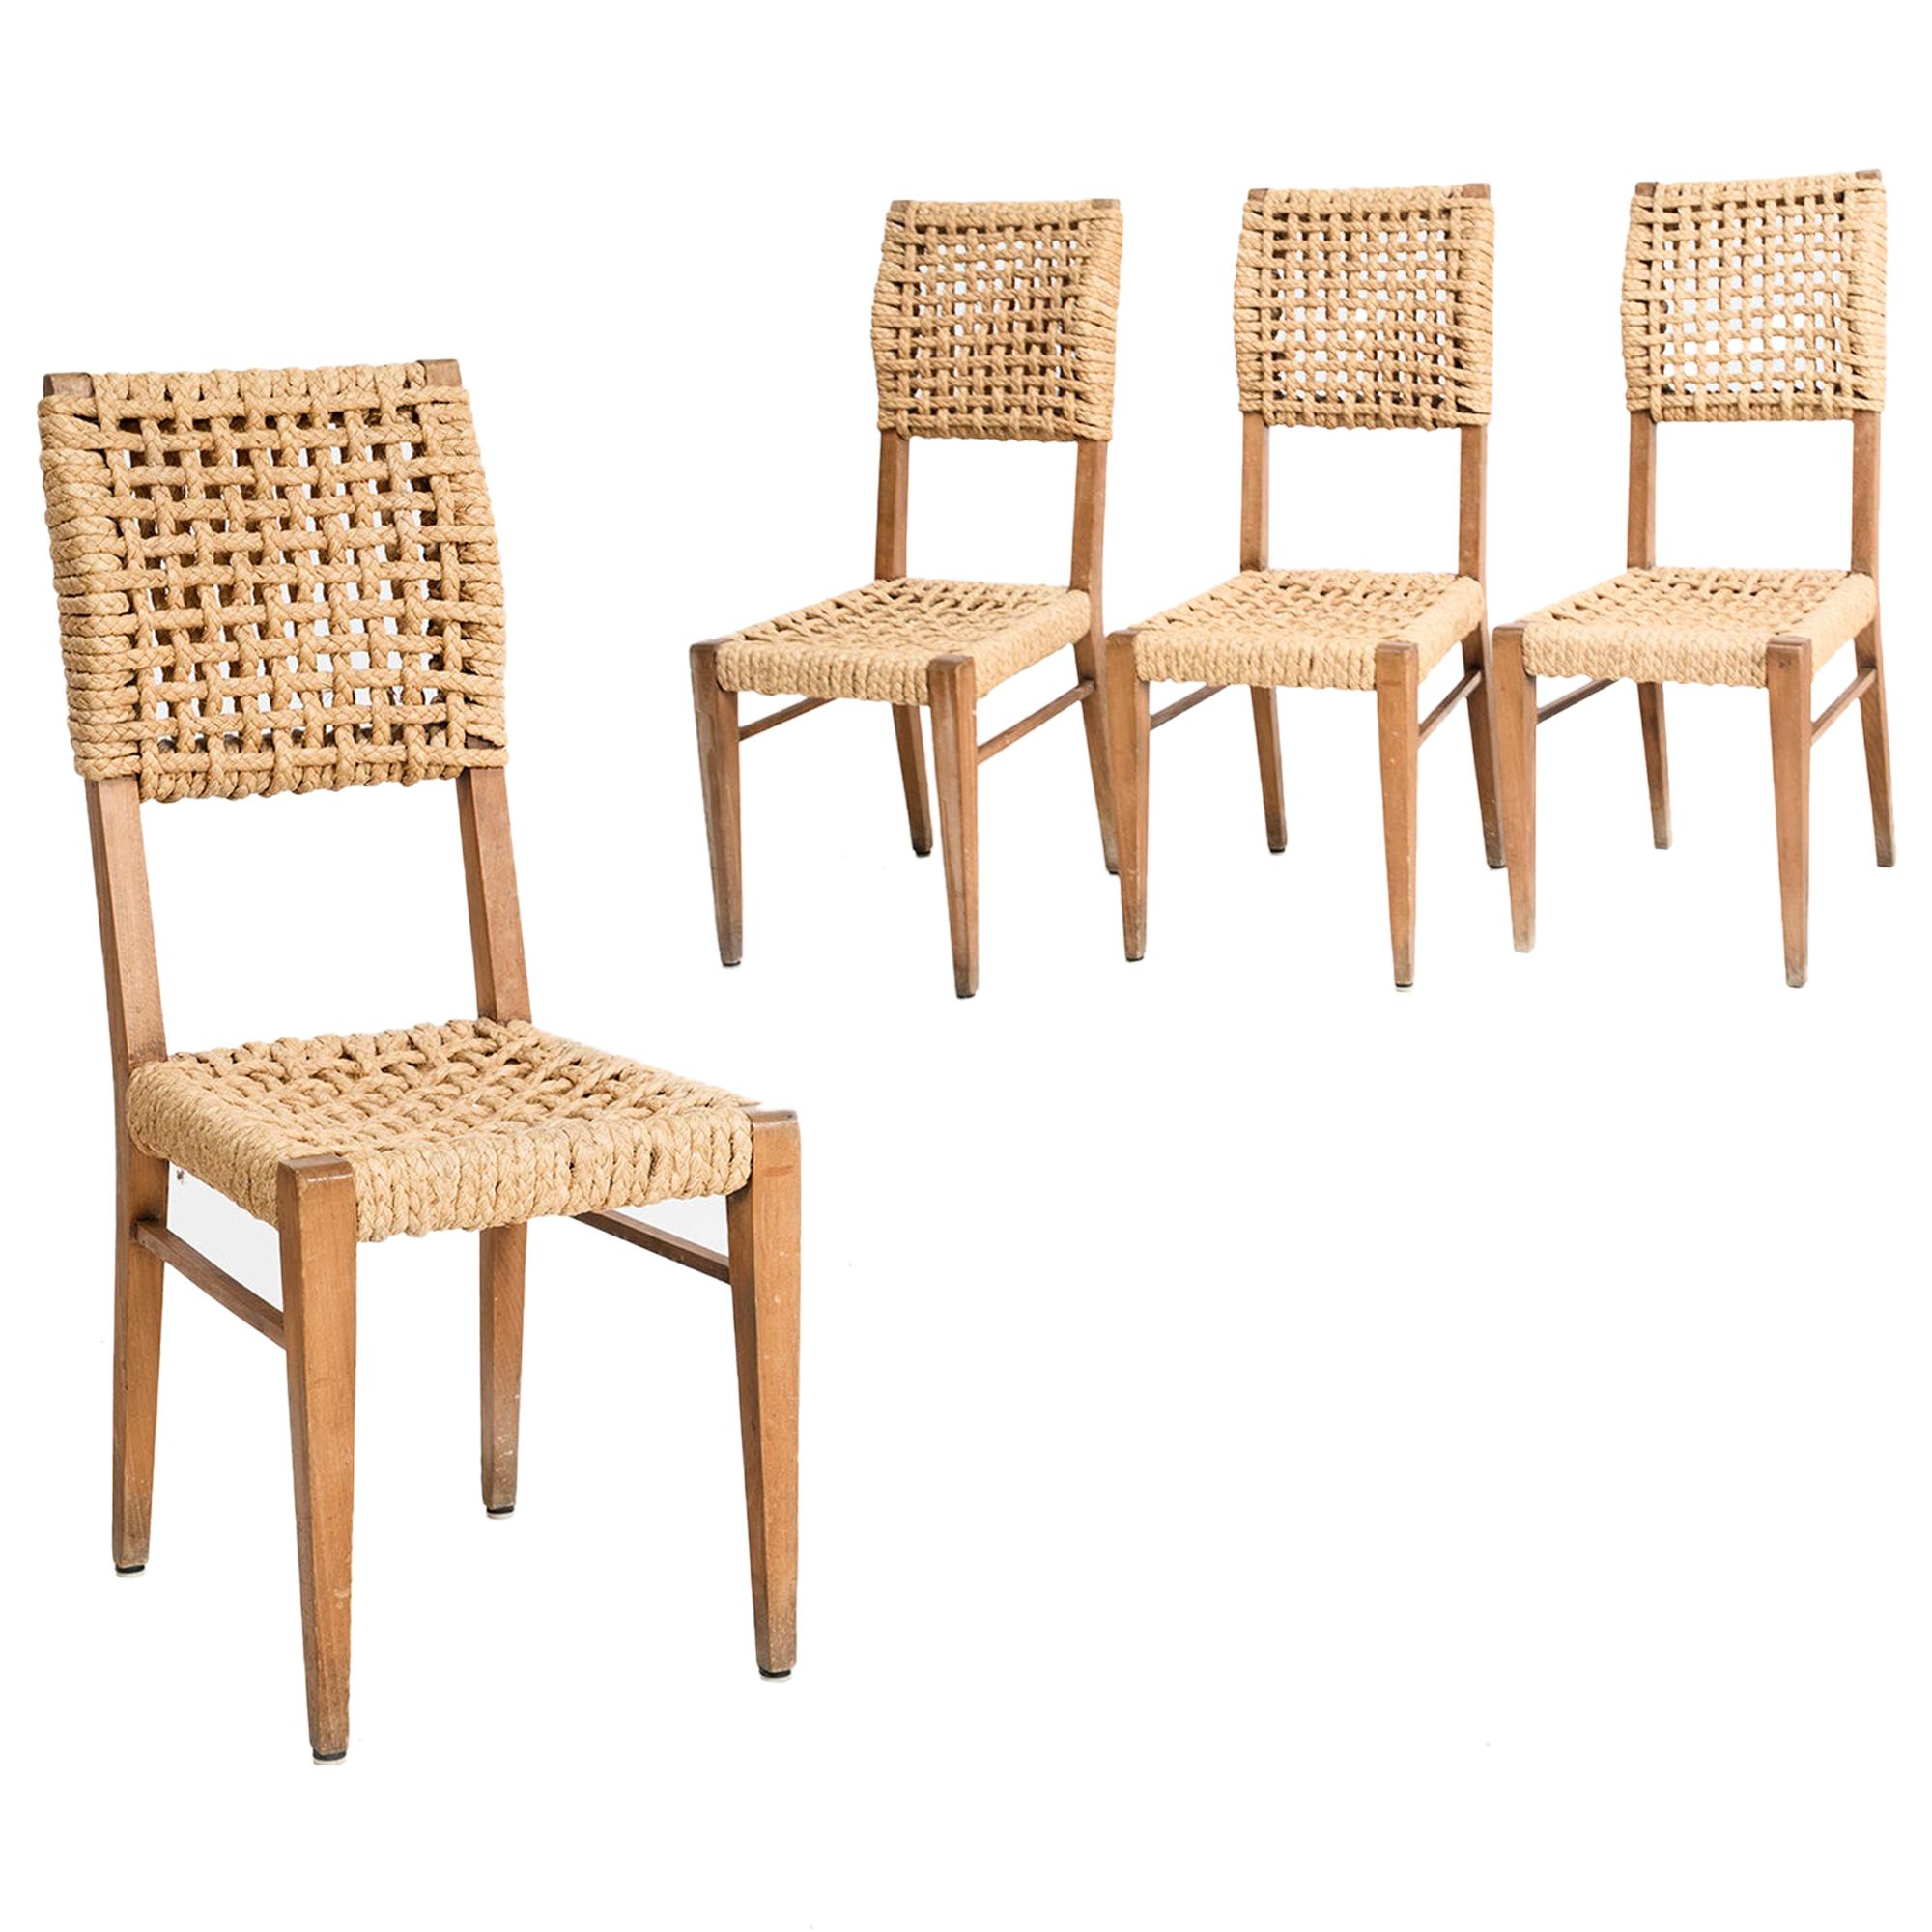 Adrien Audoux & Frida Minet, Set of Six Dining Chairs, France 1950